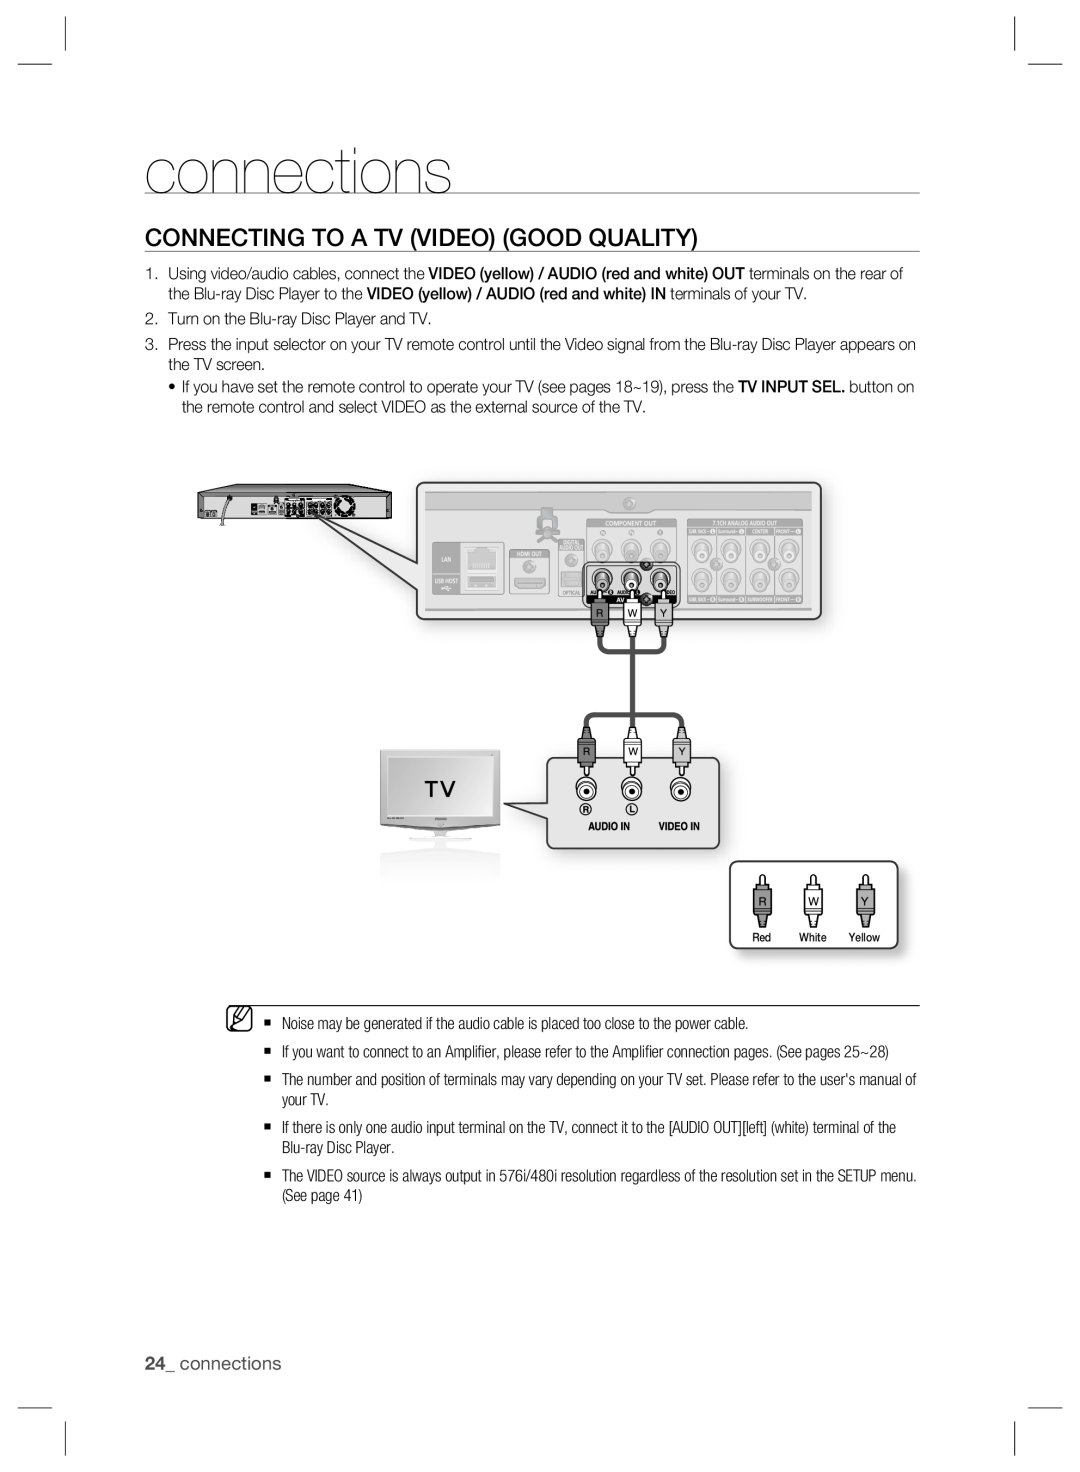 Samsung BD-P2500/EDC, BD-P2500/XEF, BD-P2500/XEE manual Connecting To A Tv Video Good Quality, connections 